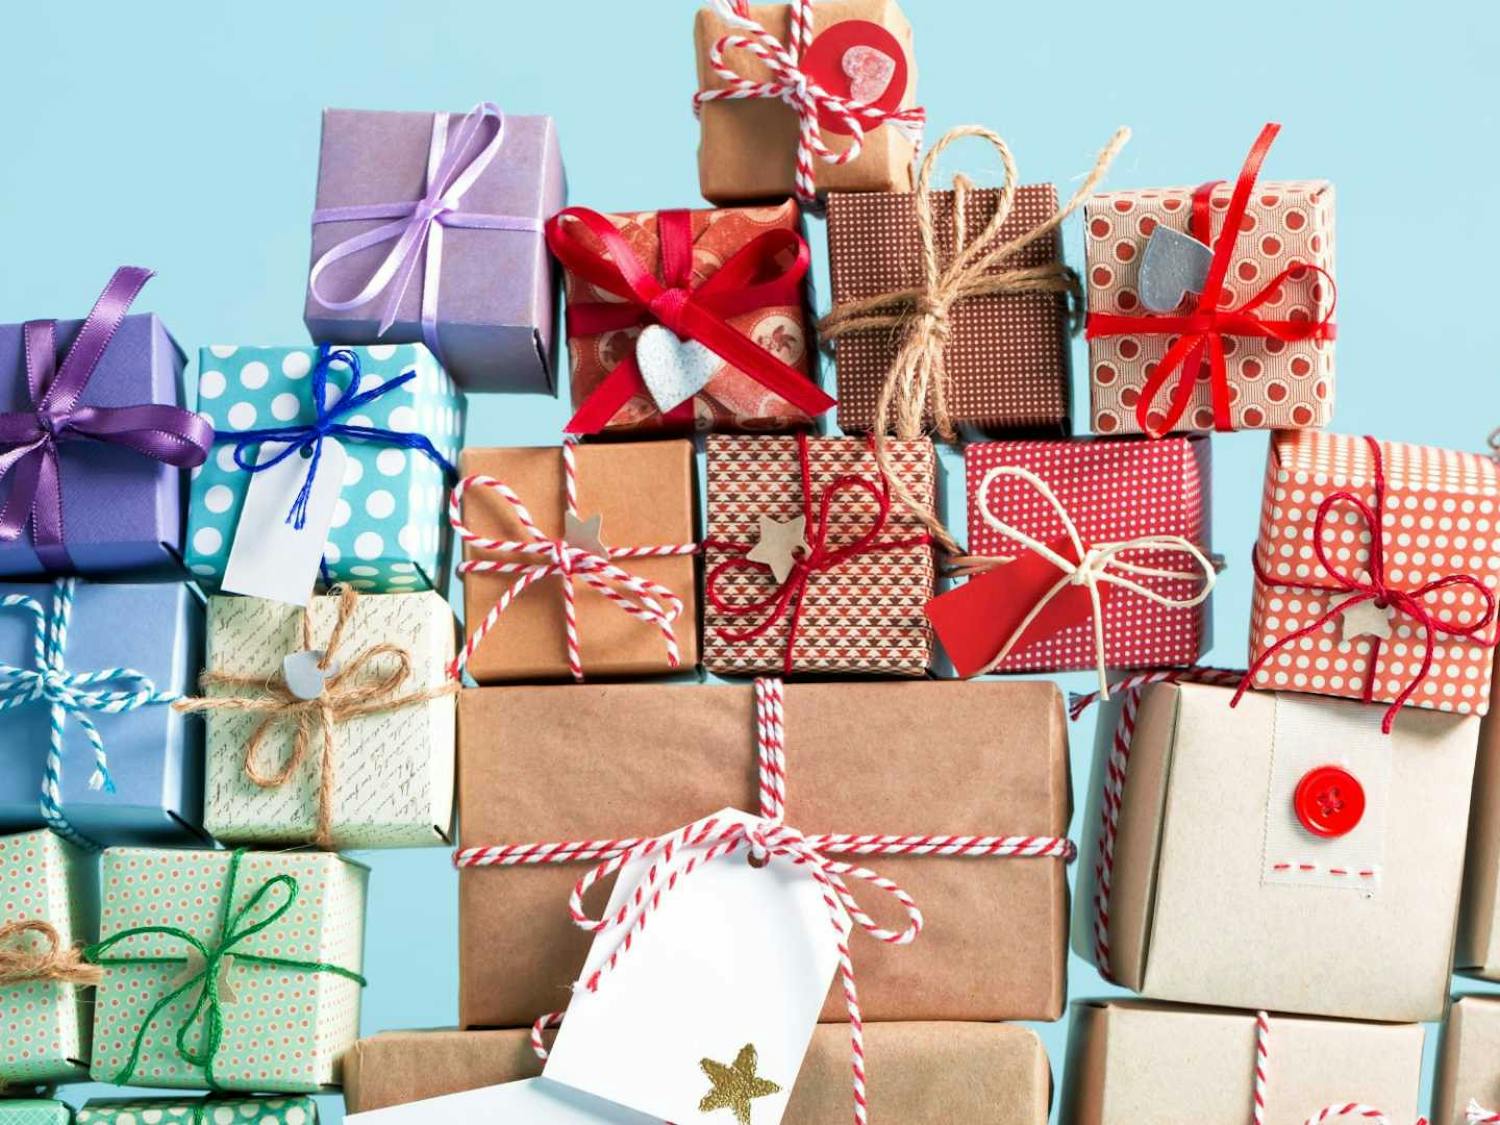 A pile of presents for the holidays | Source: Inc. Magazine